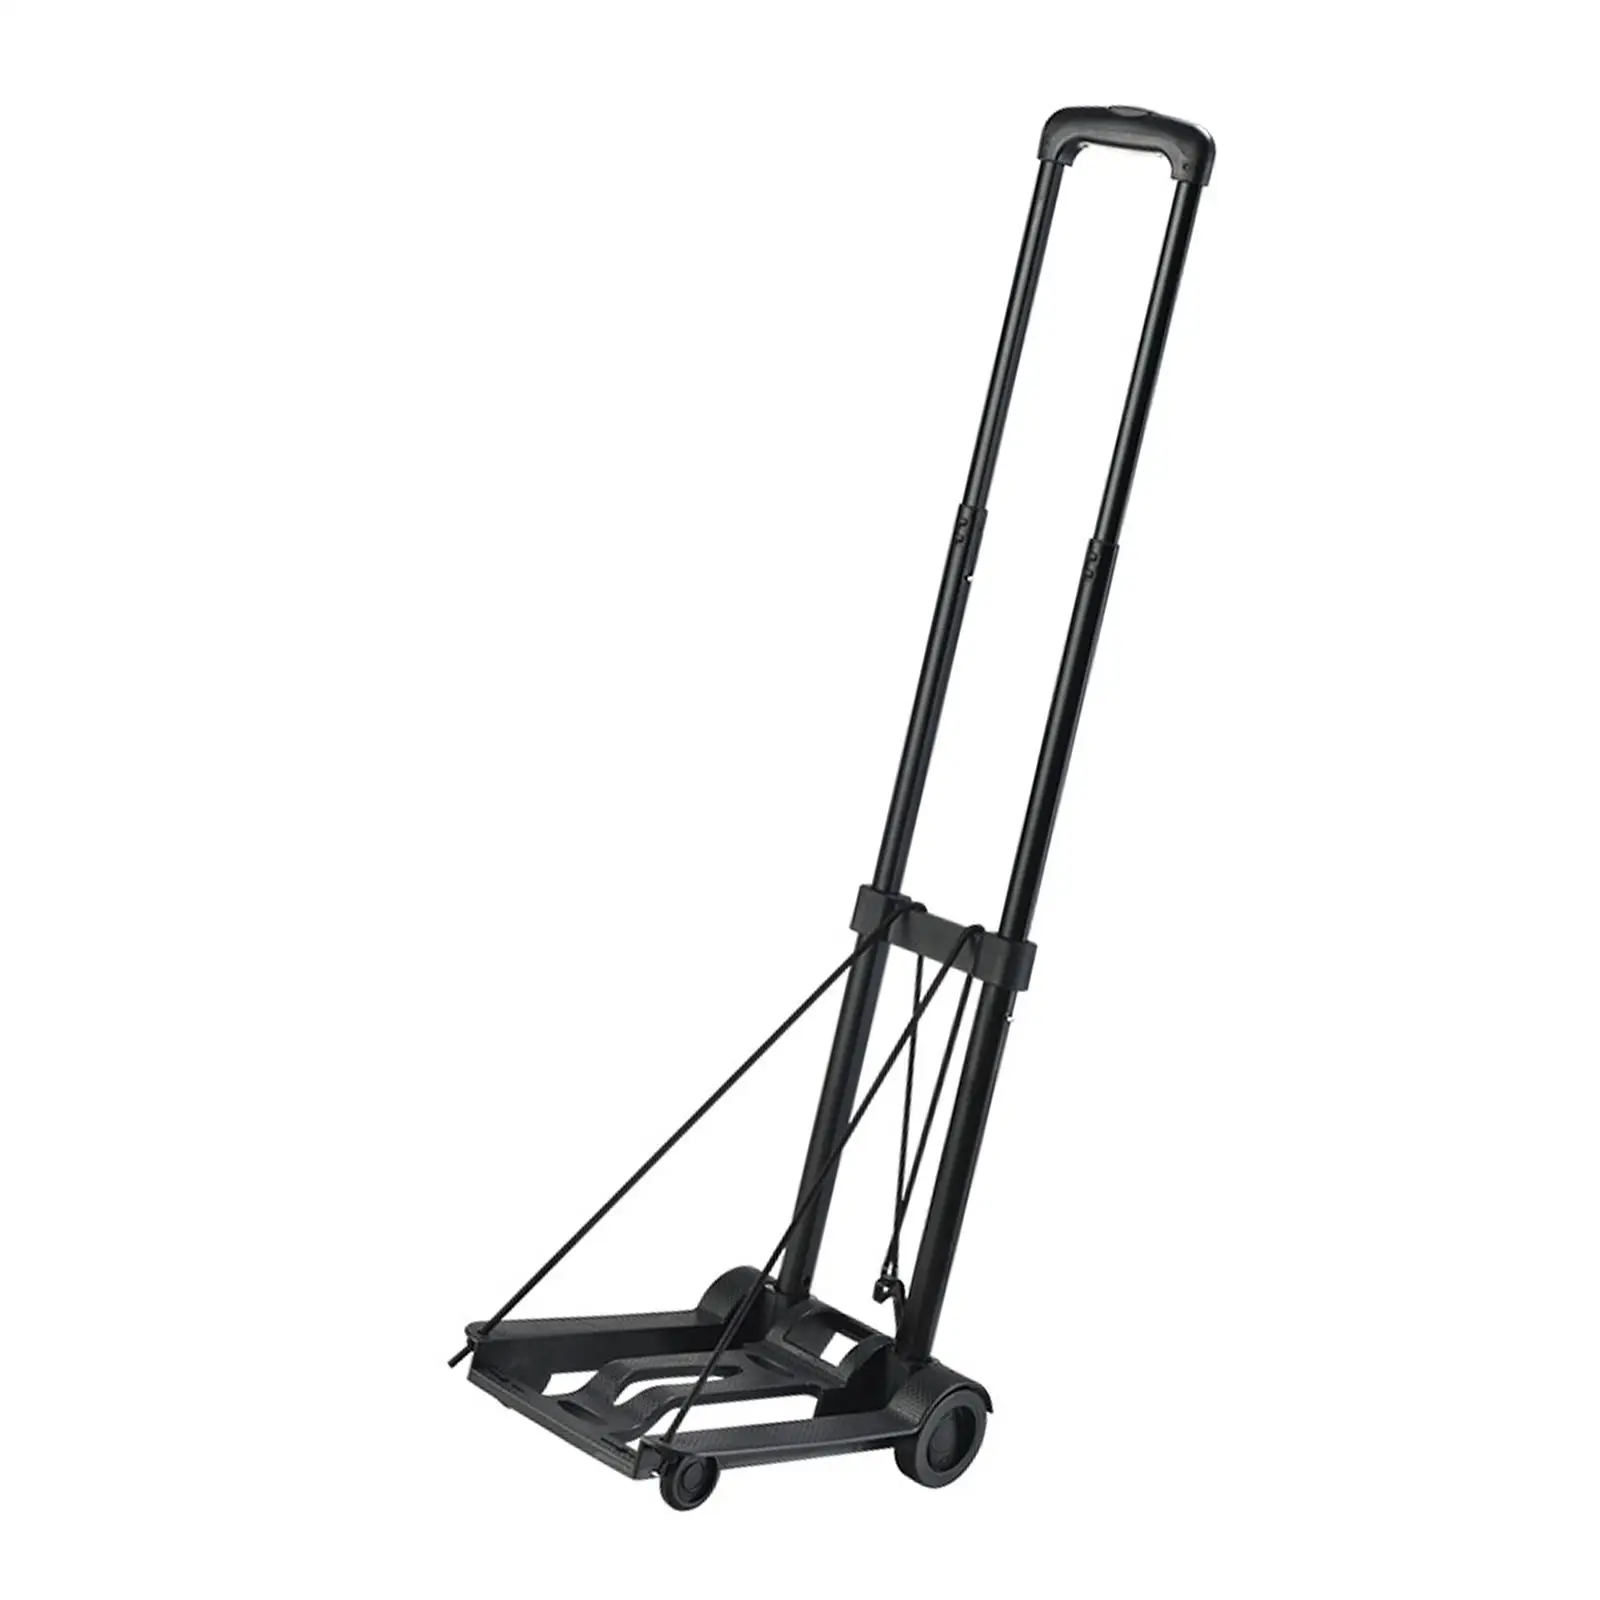 40kg Luggage Trolley Carrier Cart Traveling Multi Purpose Folding Hand Truck